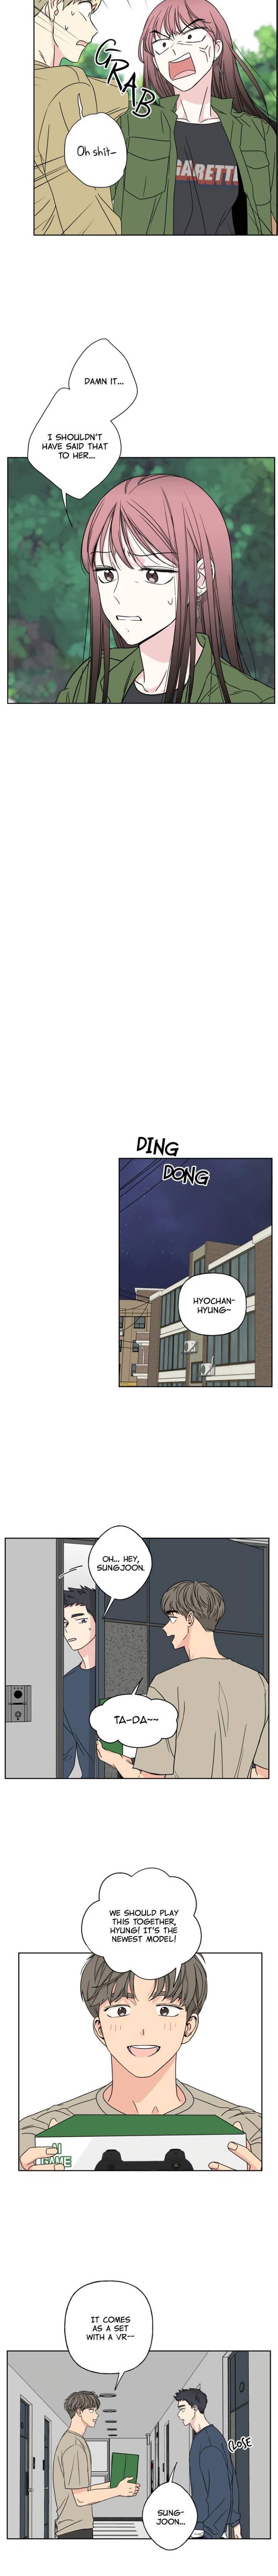 mother-im-sorry-chap-26-1